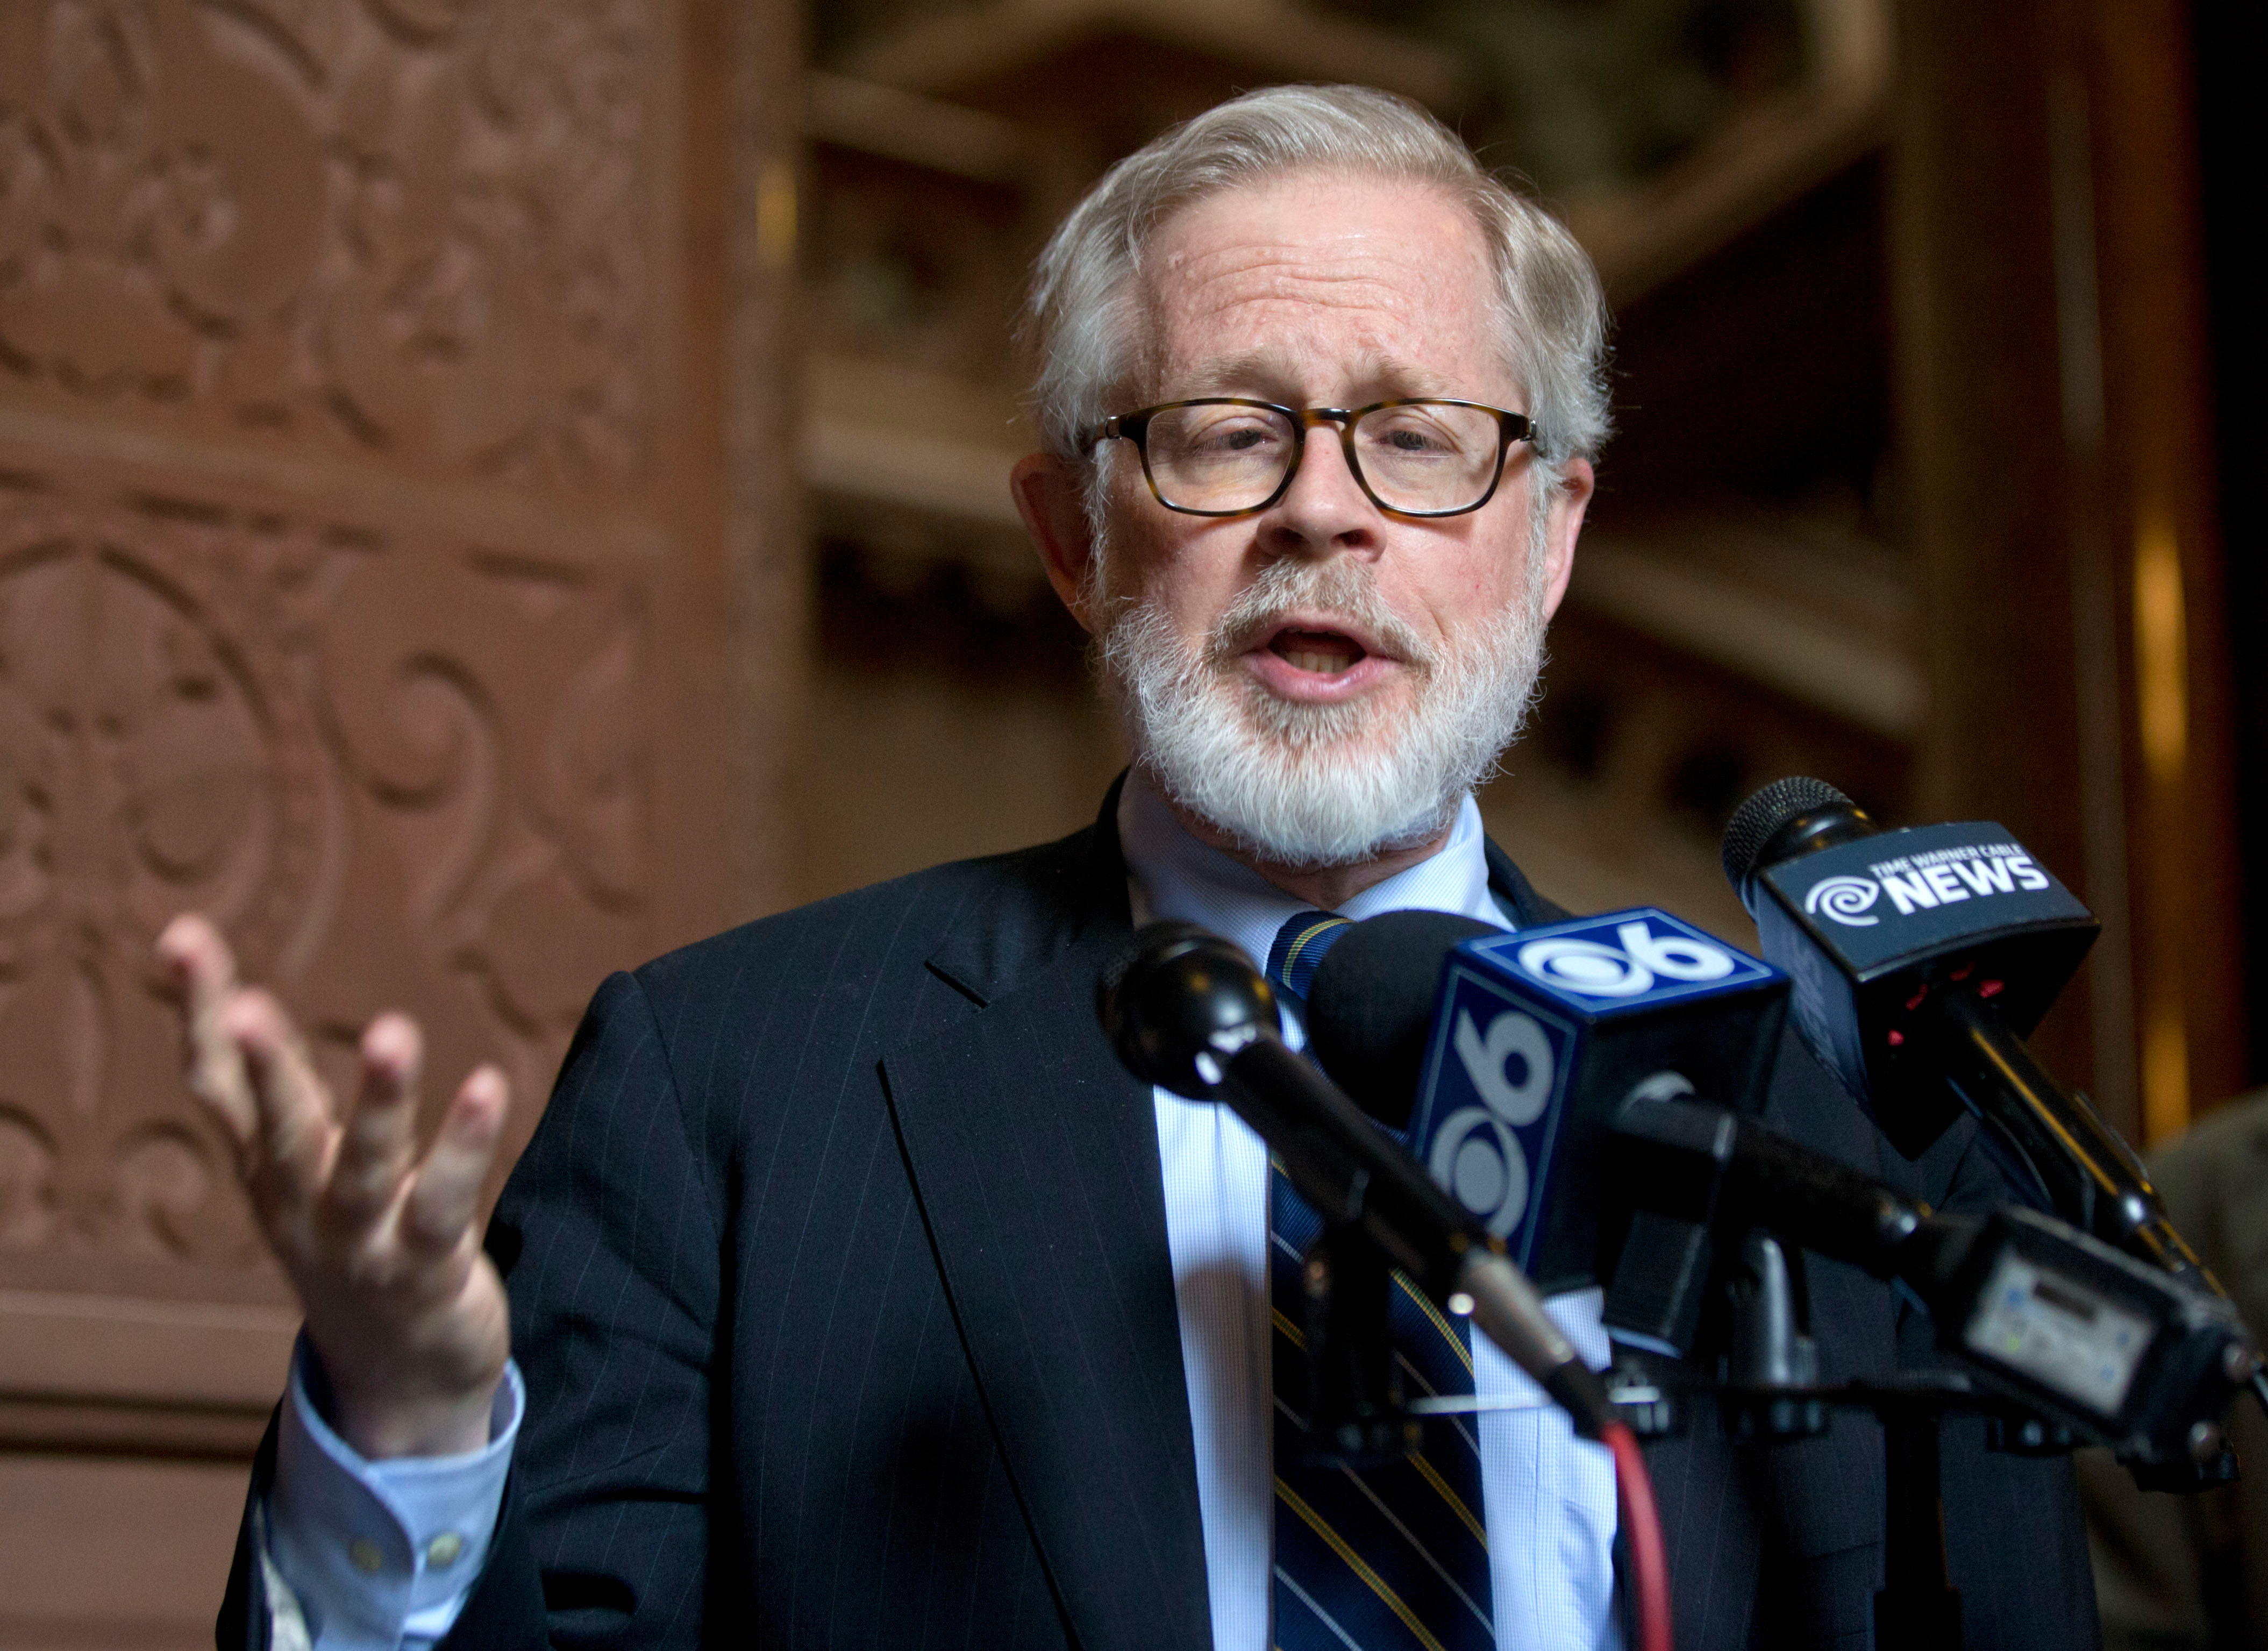 Assemblymember Richard Gottfried, D-Manhattan, speaks about legislation to legalize aid in dying during a news conference at the Capitol in Albany in February 2016. Gottfried will retire from politics after 52 years in office.